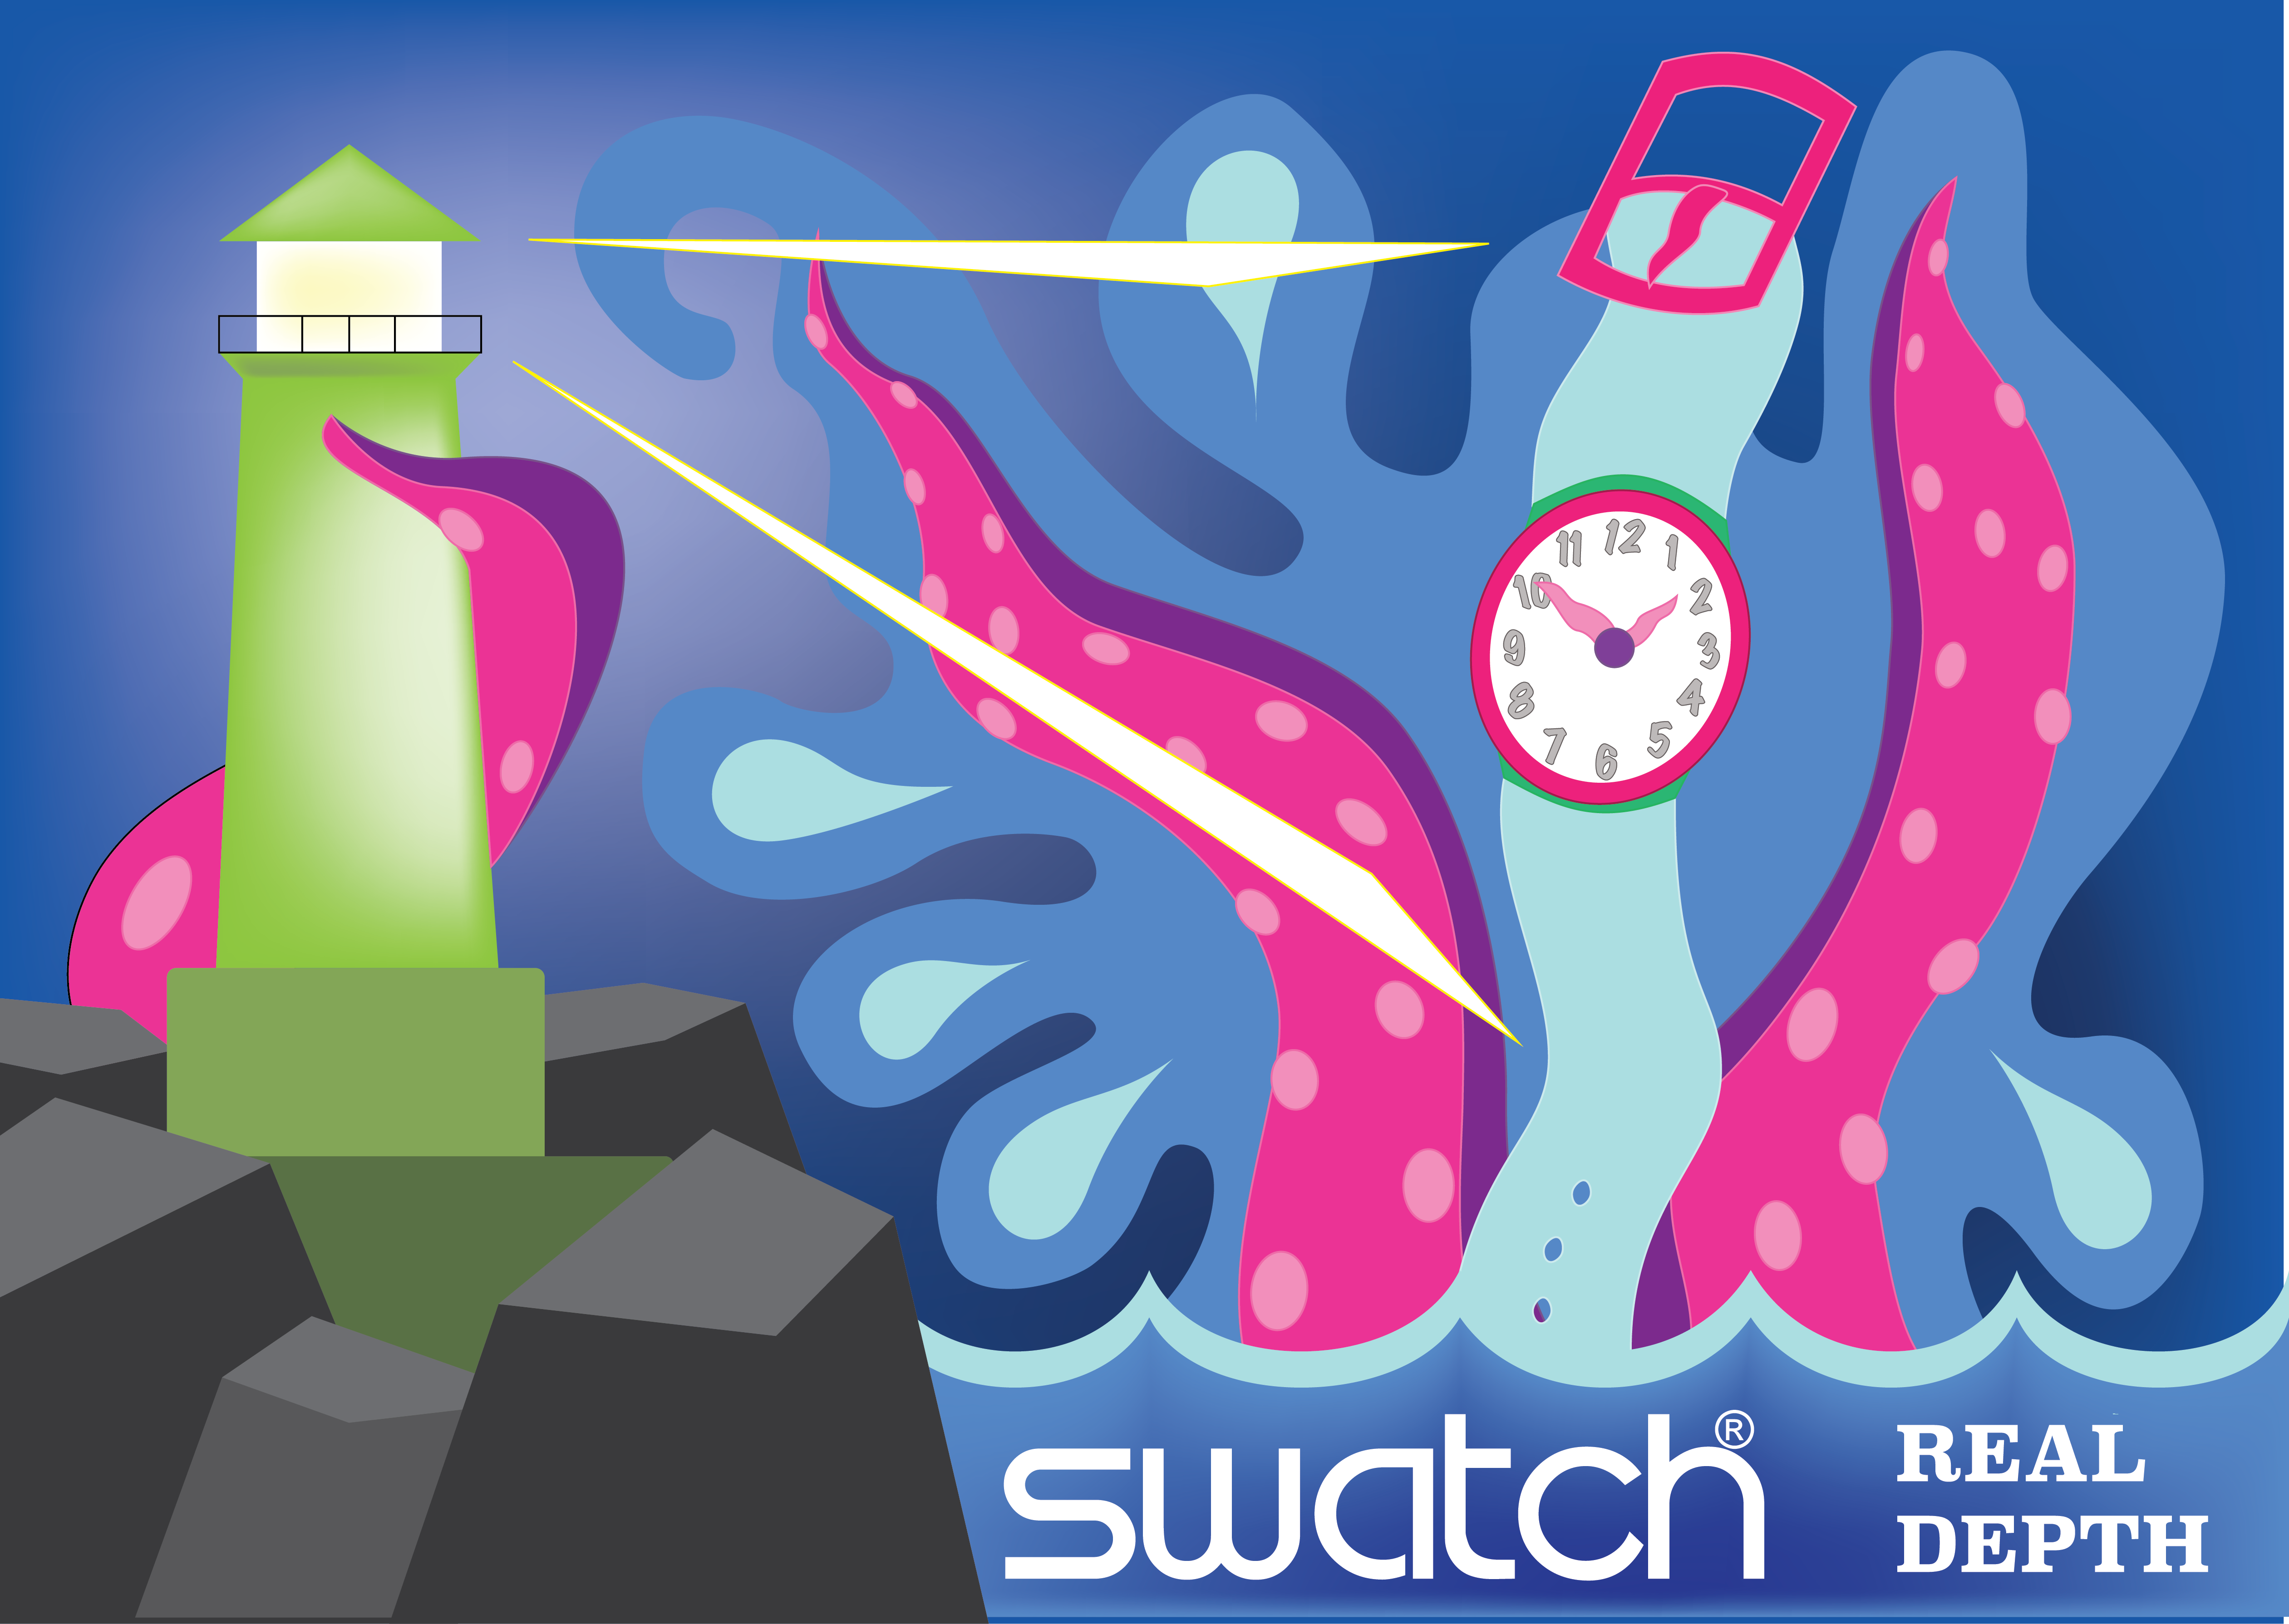 A poster for Swatch depicting a giant tentacled sea monster attacking a lighthouse. One of the tentacles is a giant wristwatch.